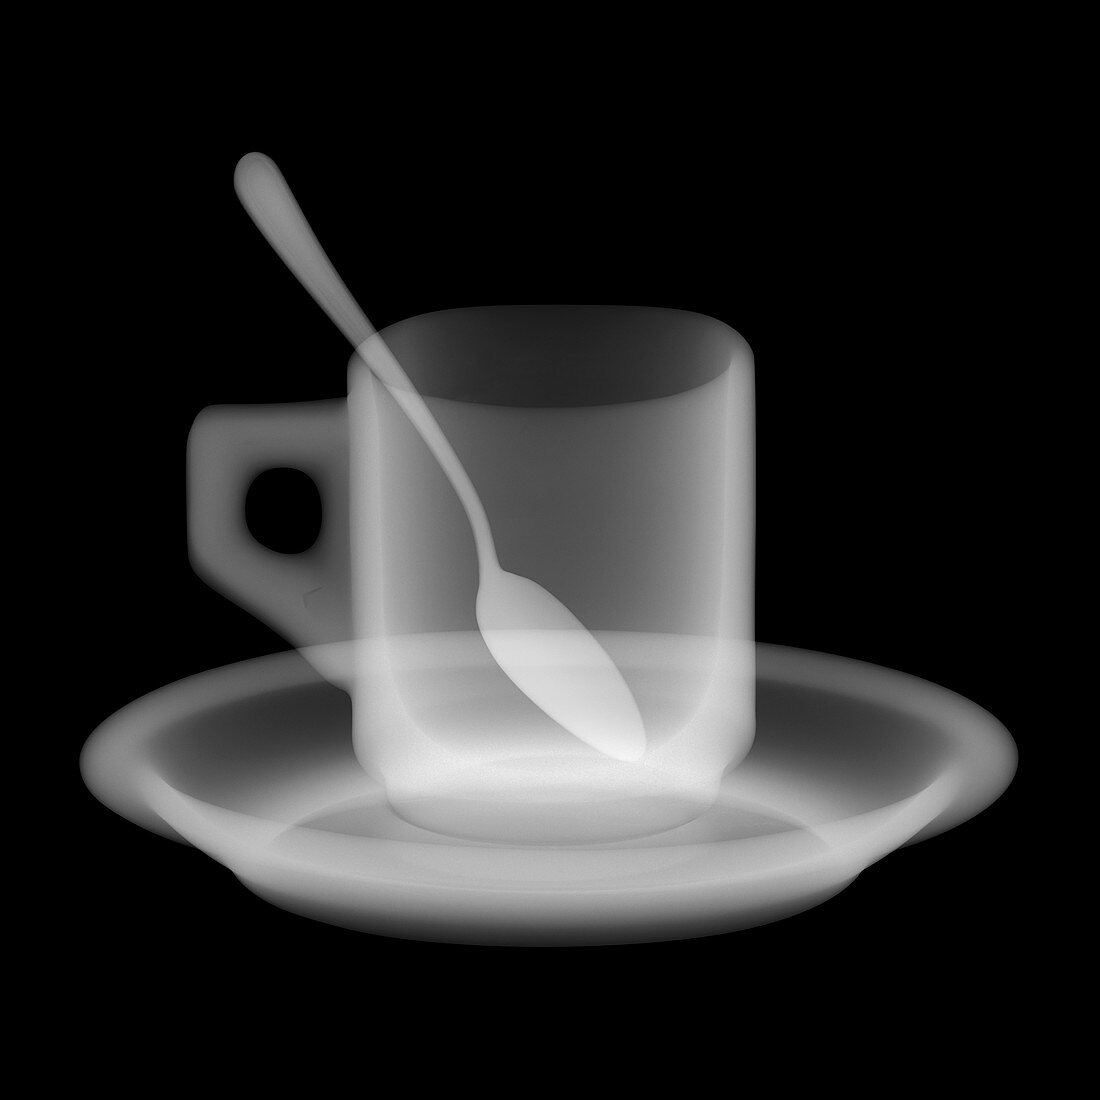 Espresso cup saucer and spoon, X-ray